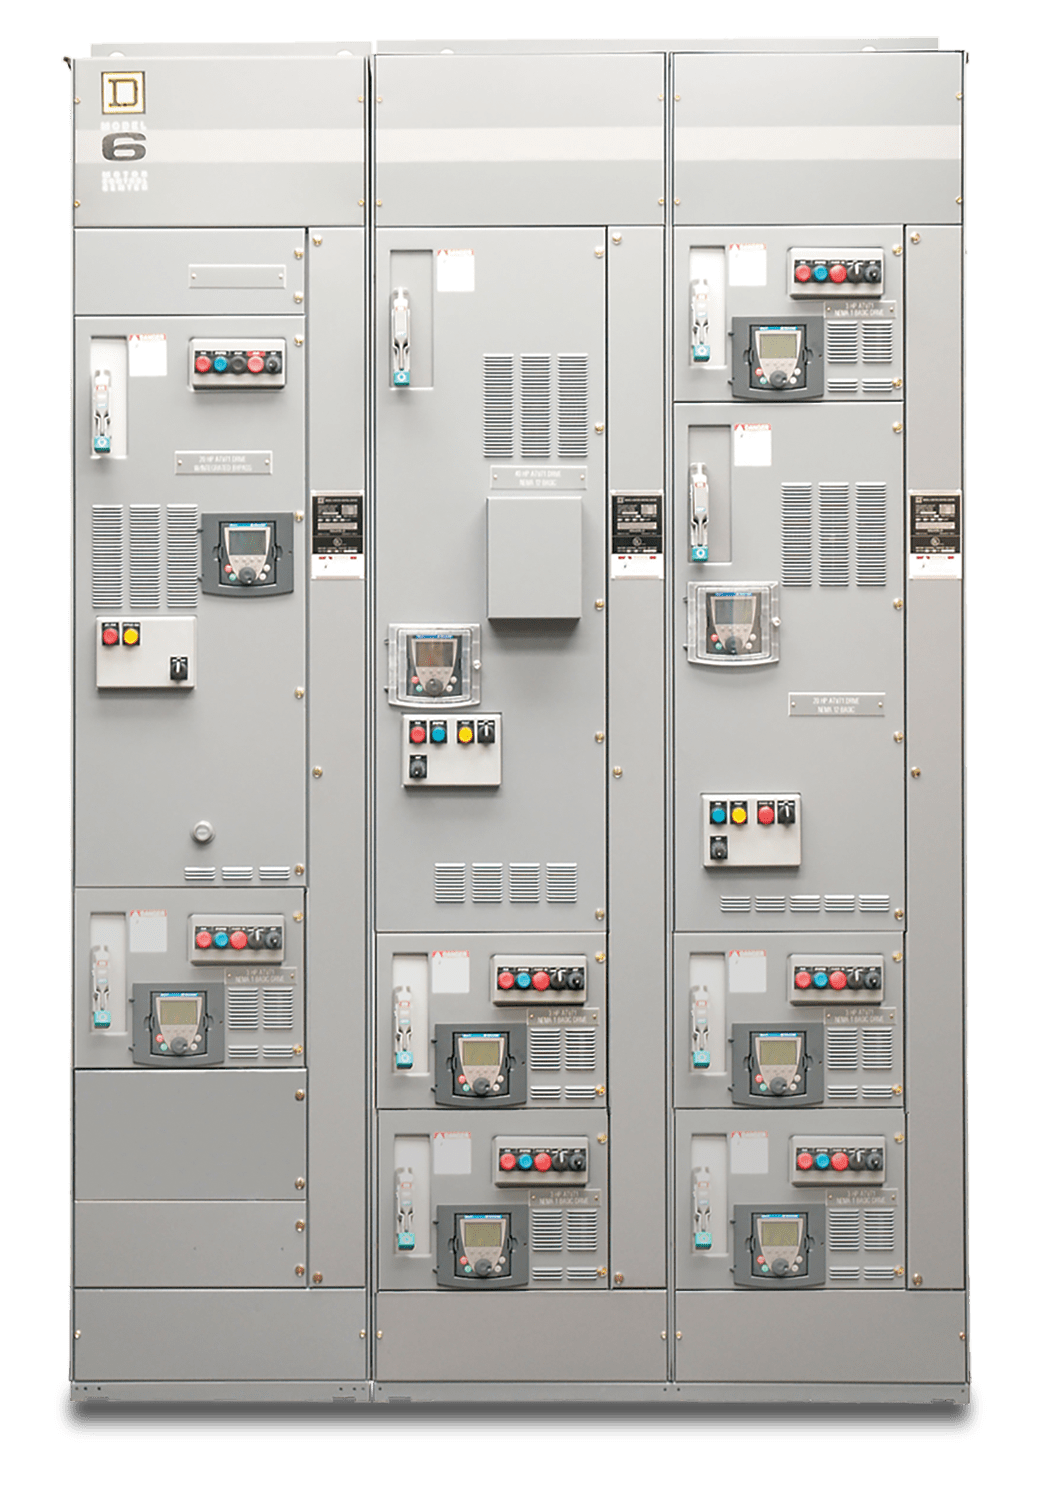 Power Distribution and Controls